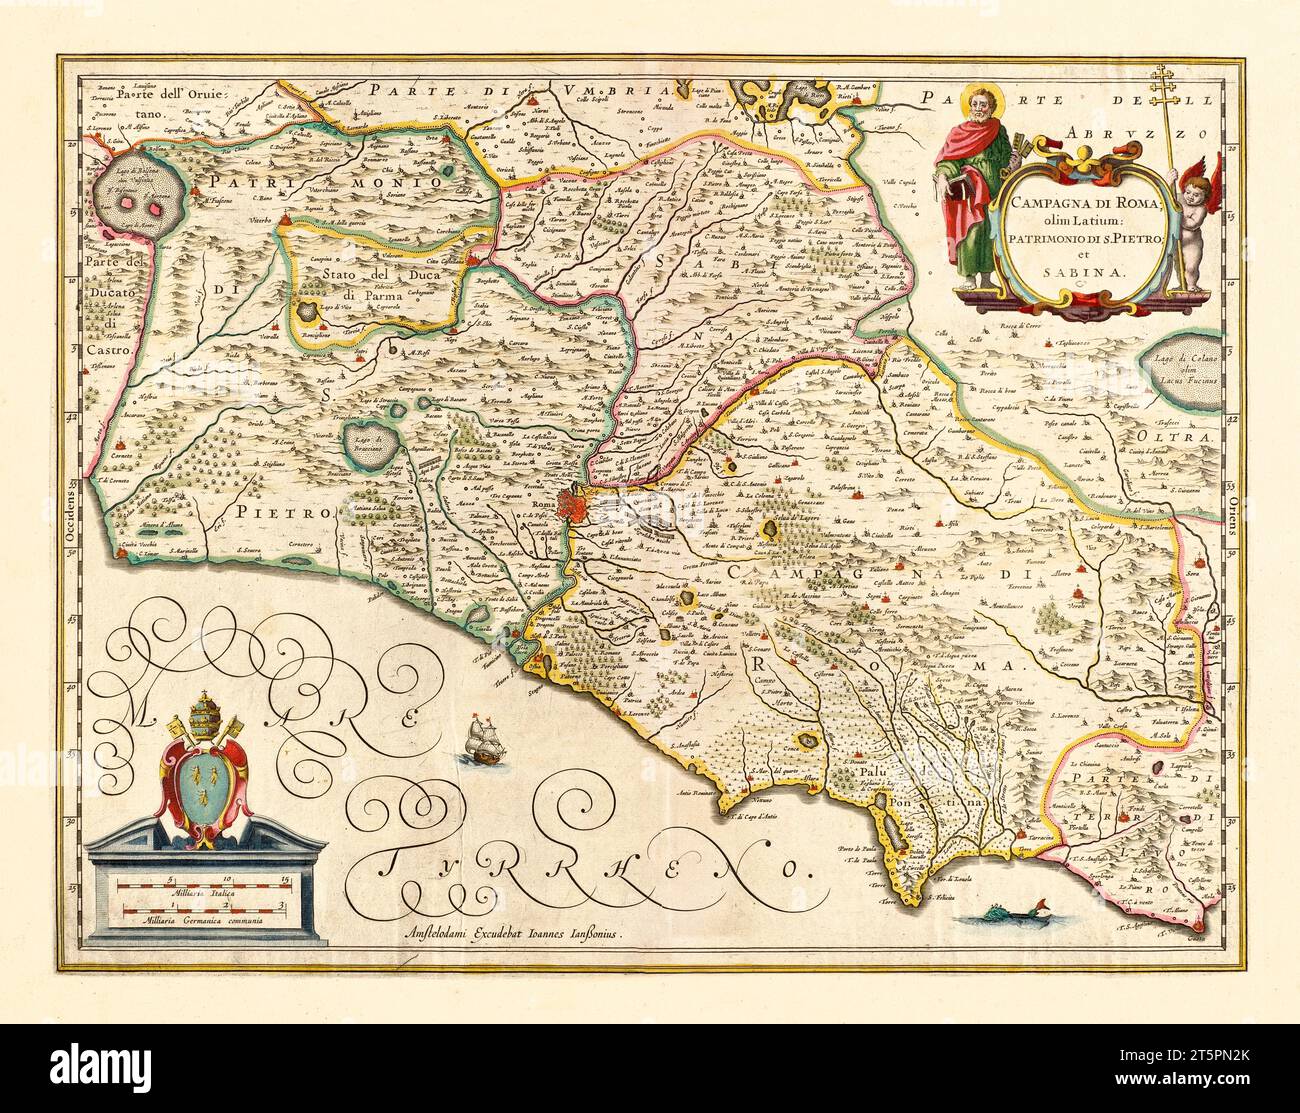 Old map of Lazio region, Italy. By Jansson, publ. ca. 1645 Stock Photo